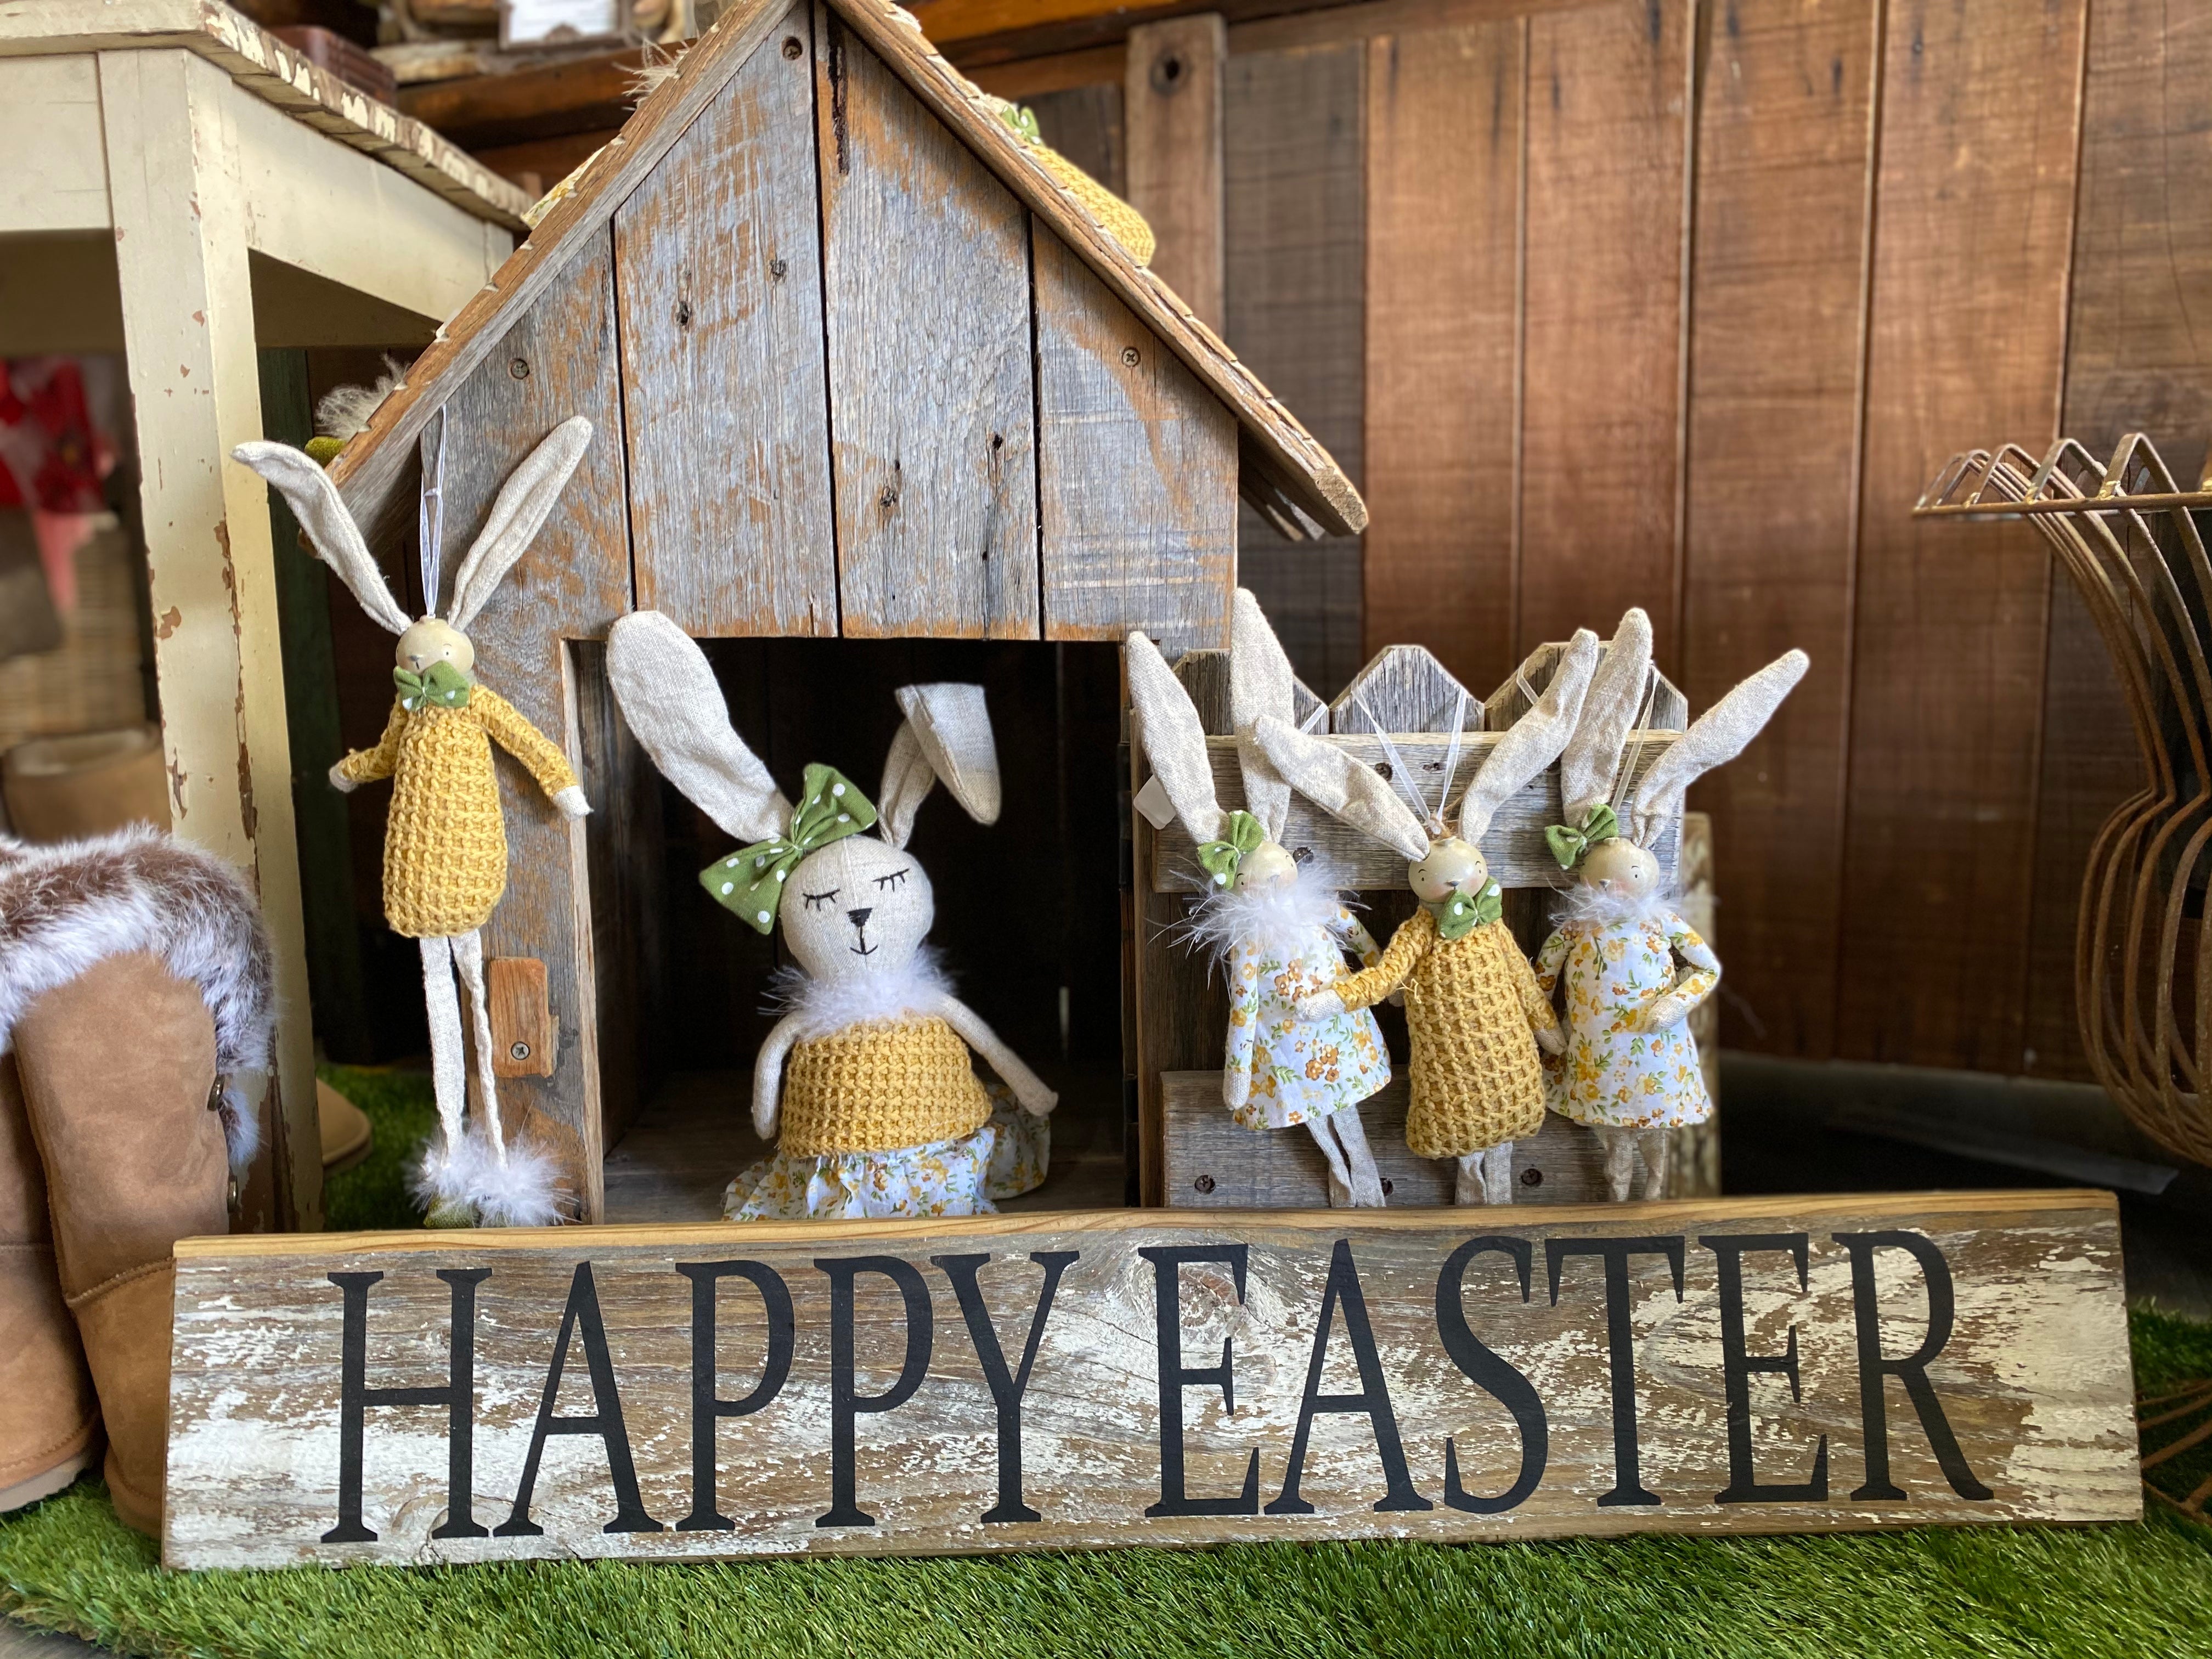 XL HAPPY EASTER Handmade RUSTIC Sign FREE Postage